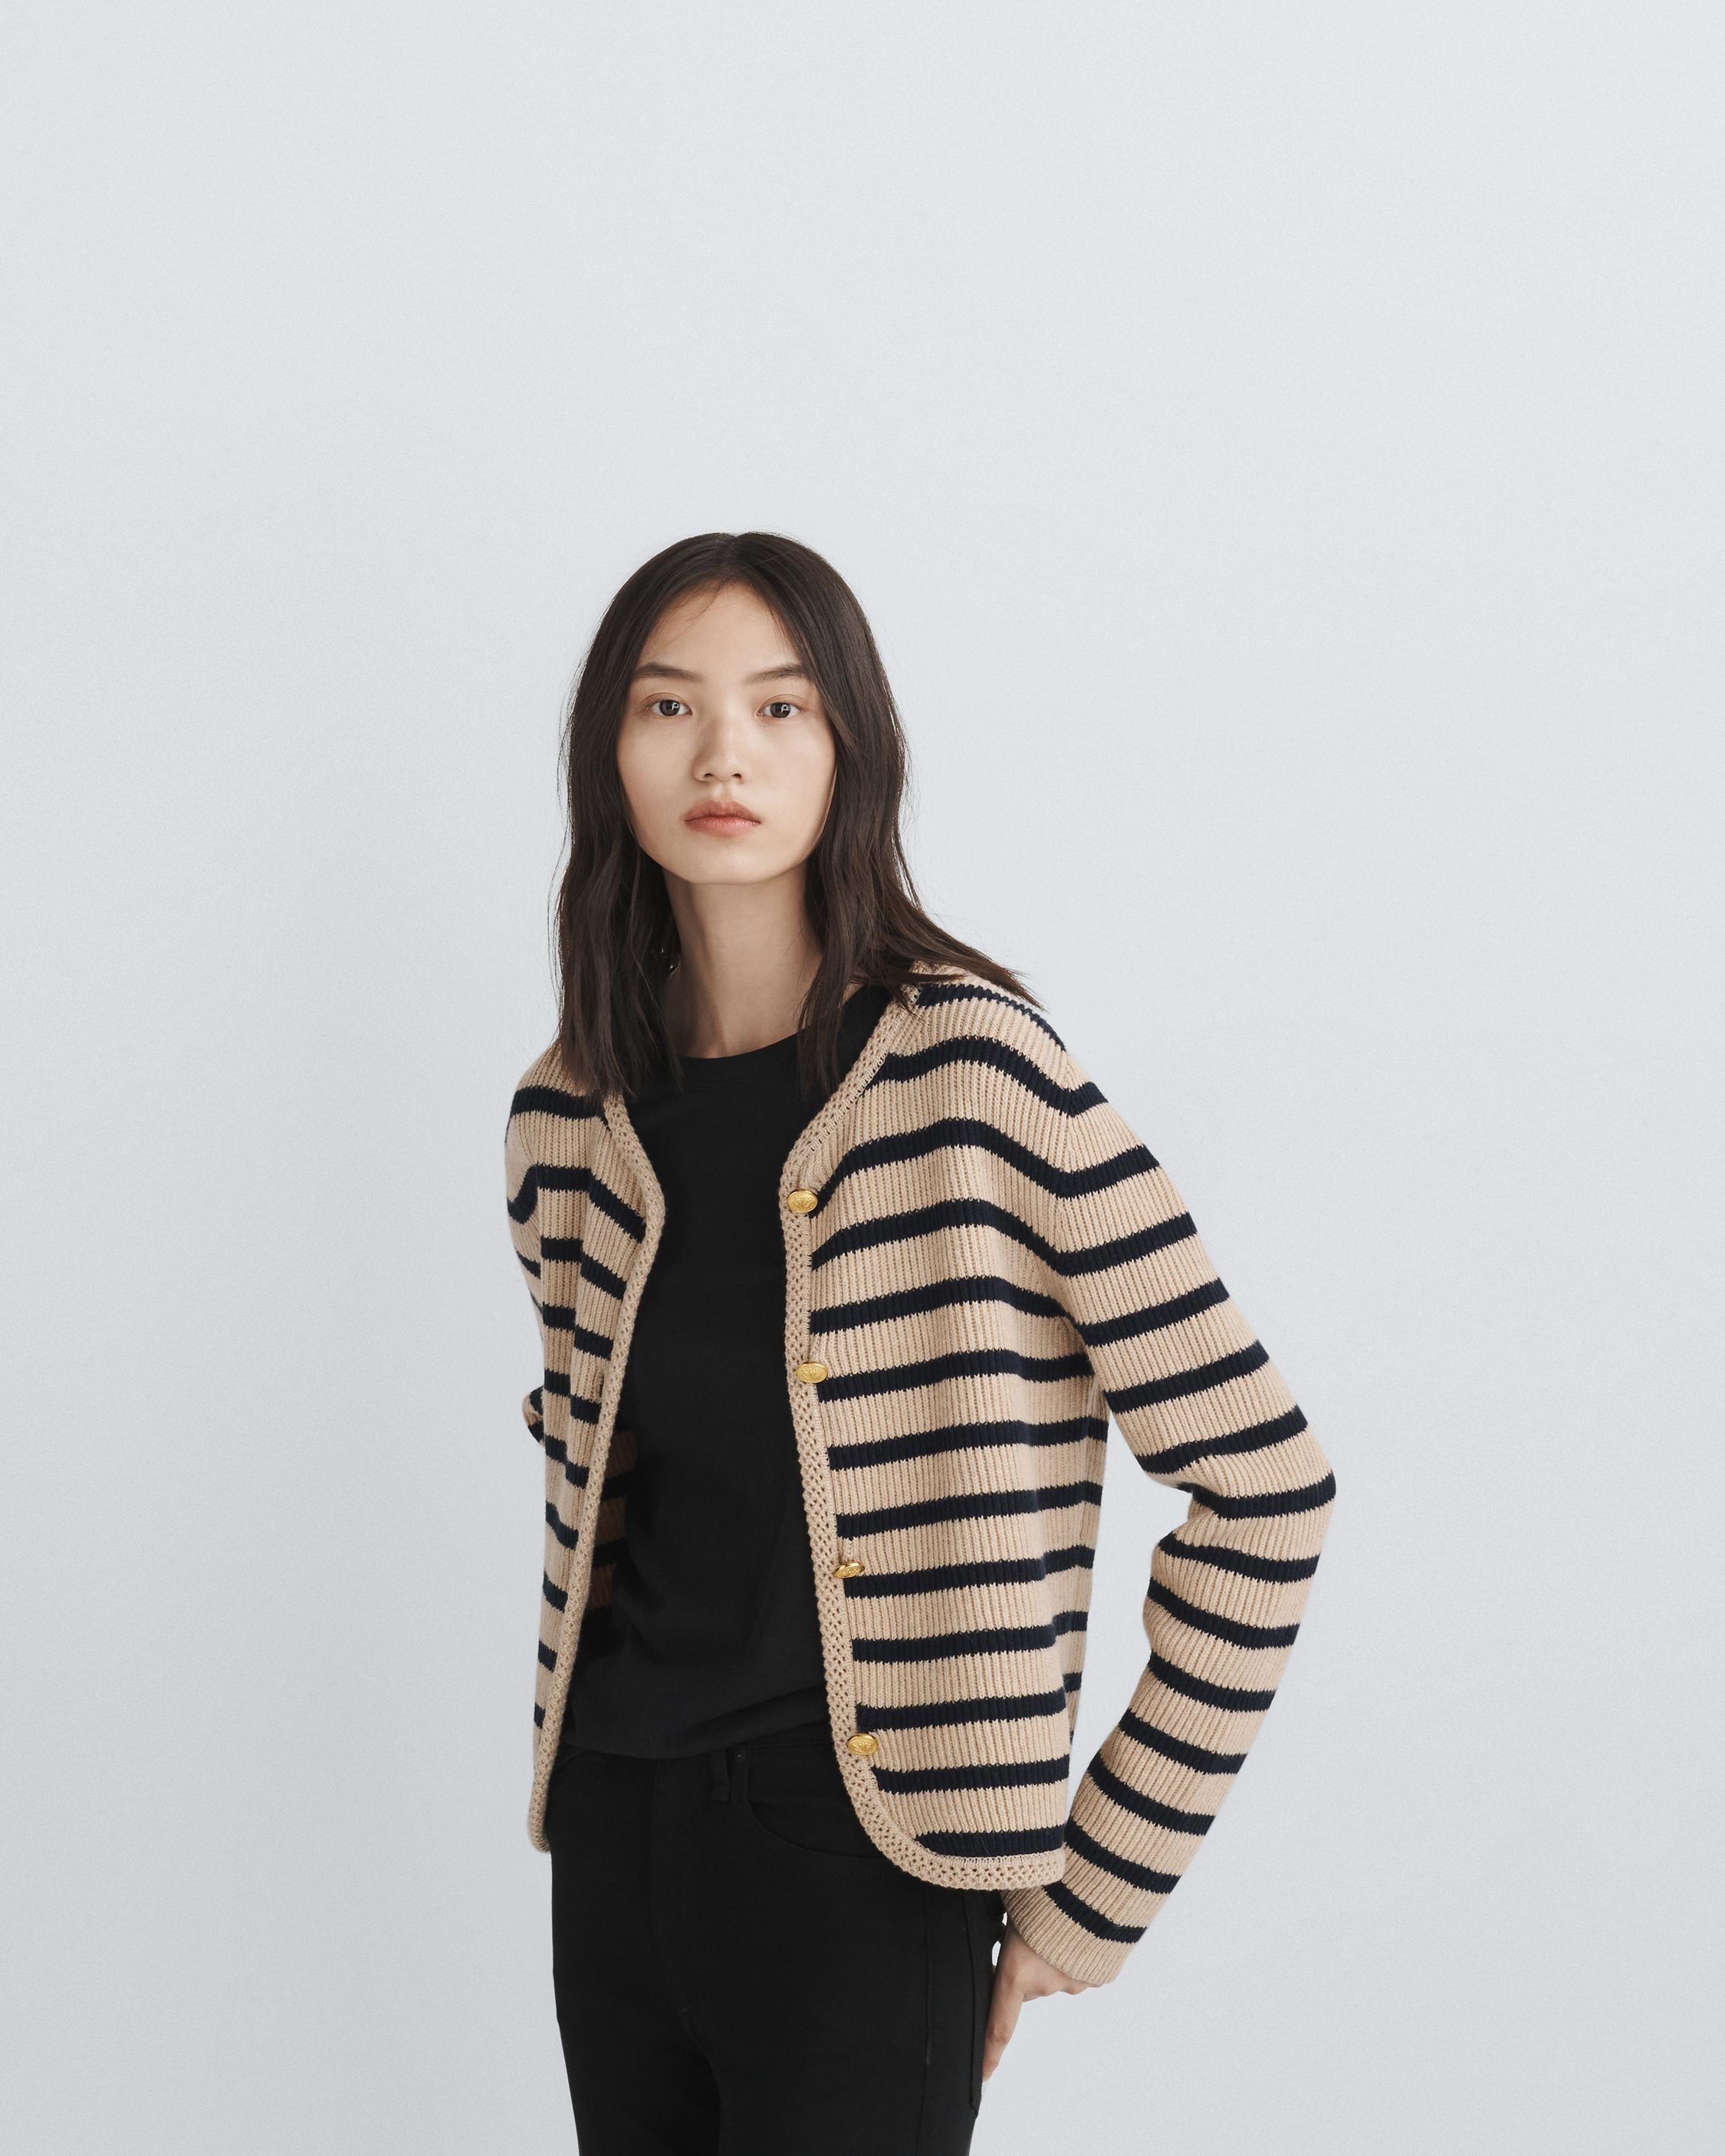 Nancy Wool Cardigan
Relaxed Fit Sweater - 7